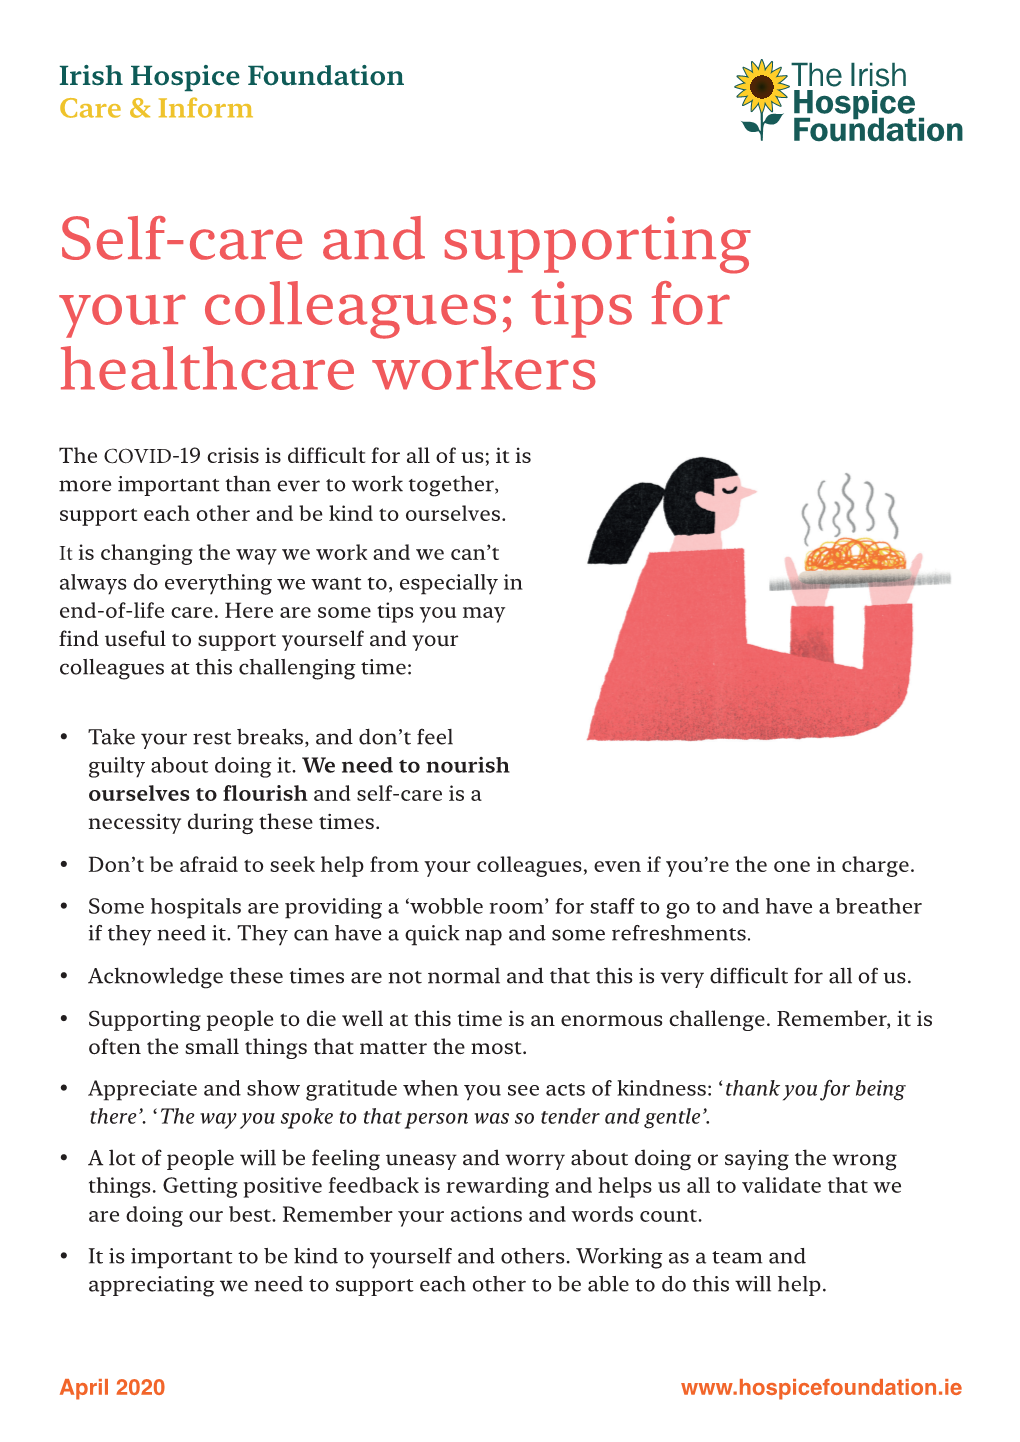 Self-Care and Supporting Your Colleagues; Tips for Healthcare Workers